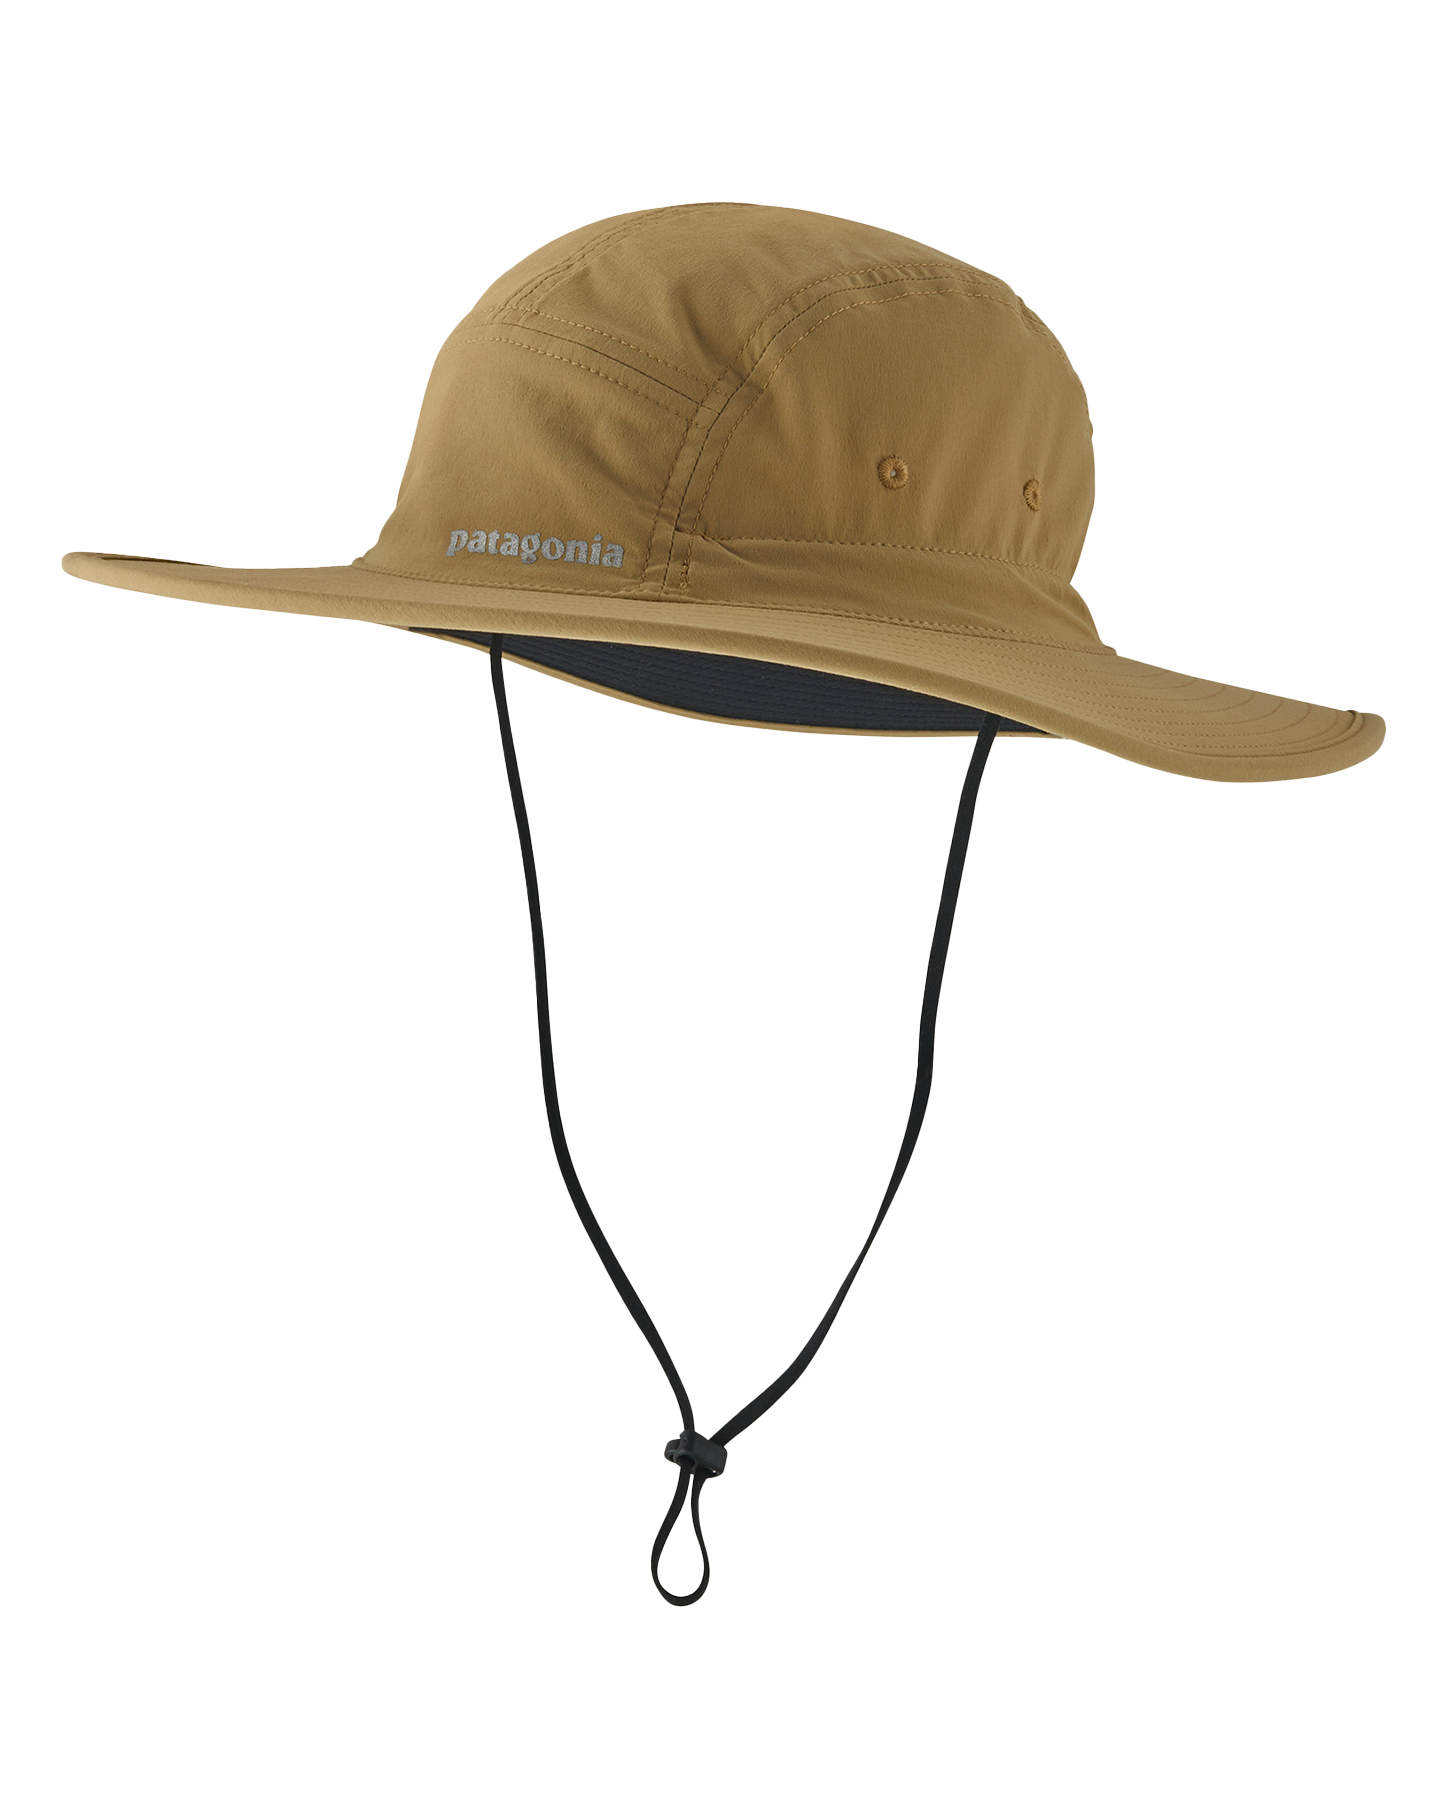 Patagonia Quandary Brimmer - Classic Tan Hats - SnowSkiersWarehouse